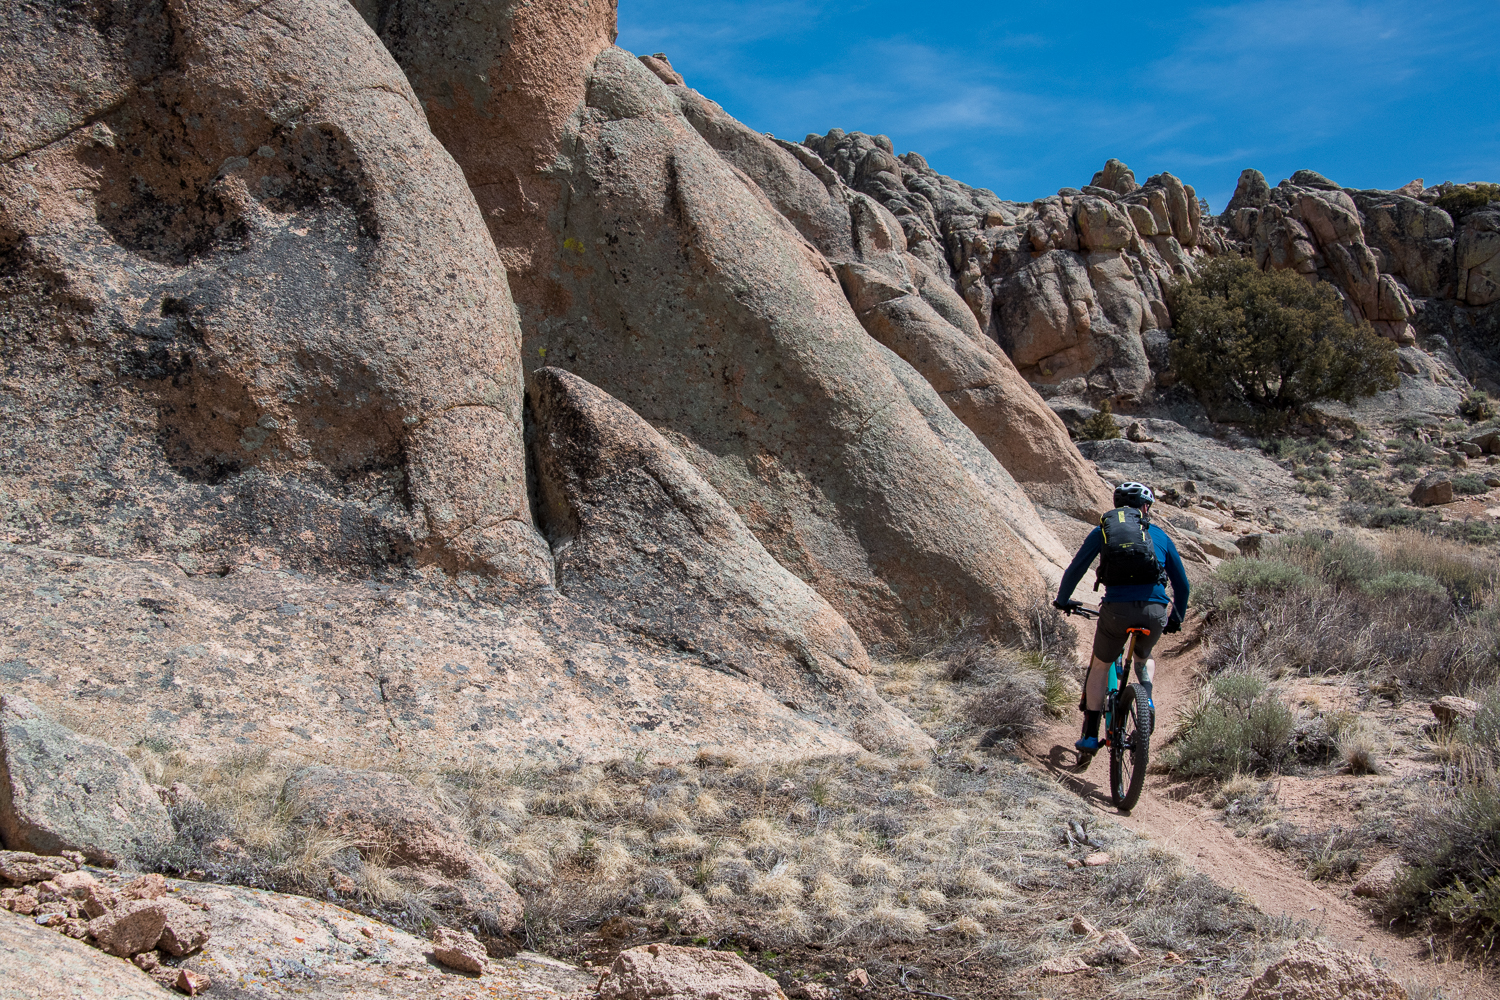 A person riding a mountain bike on a singletrack trail next to rock formations that are characteristic of MTB at Hartman Rocks 